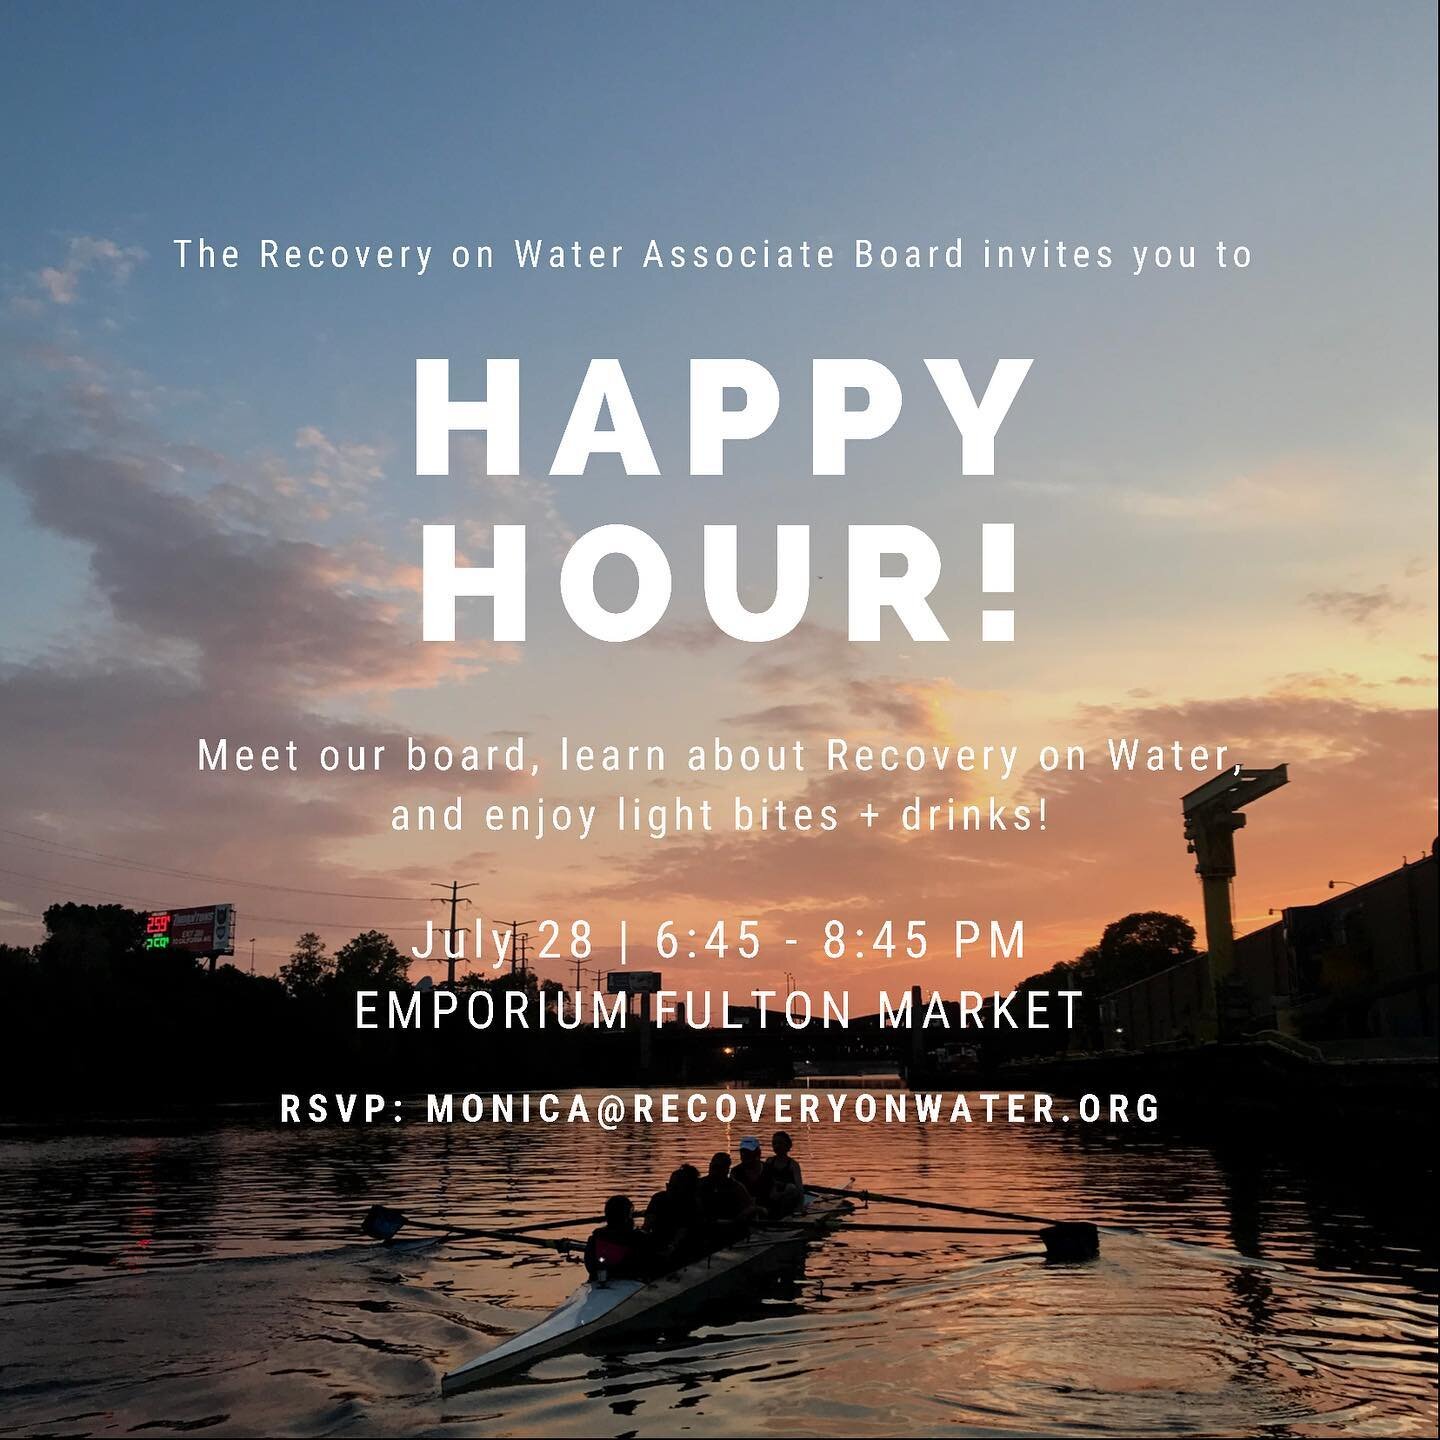 Meet members of our Associate Board and learn about @recoveryonwater this Wednesday @emporiumchicago! 

Please RSVP to Monica@RecoveryOnWater.org